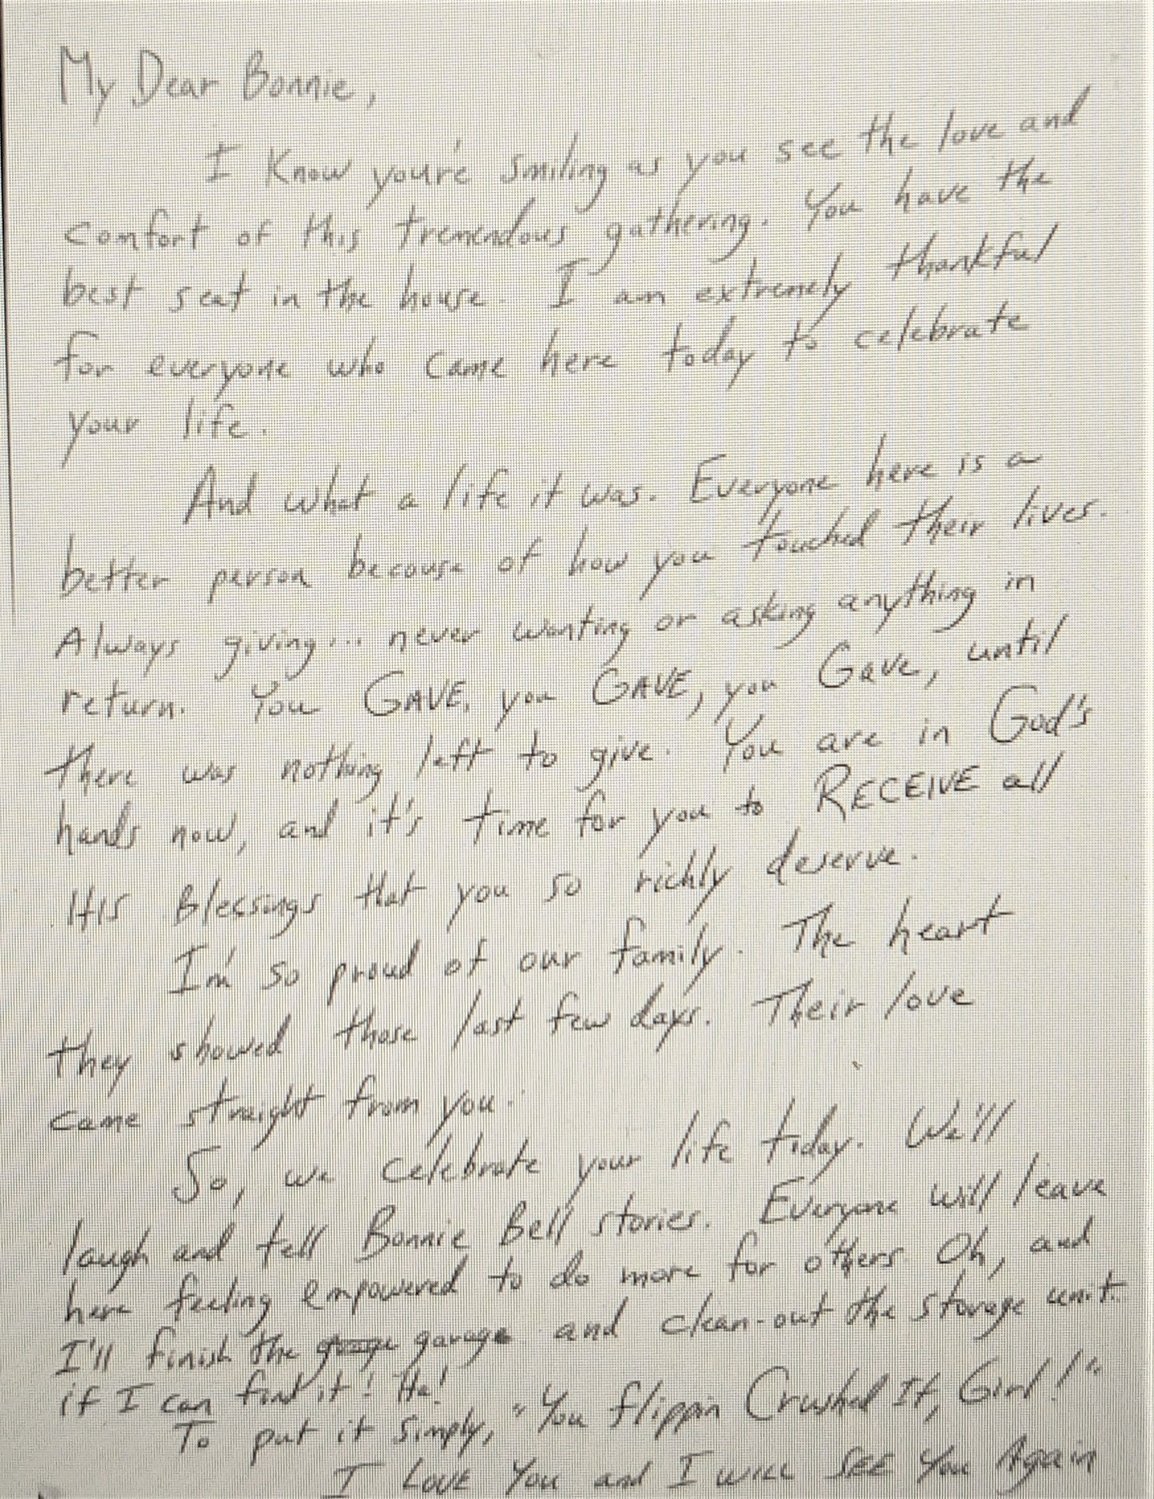 A last letter hand-written by Pat McGowan to his wife, Bonnie Bell McGowan, who died at age 68 on Jan. 12.